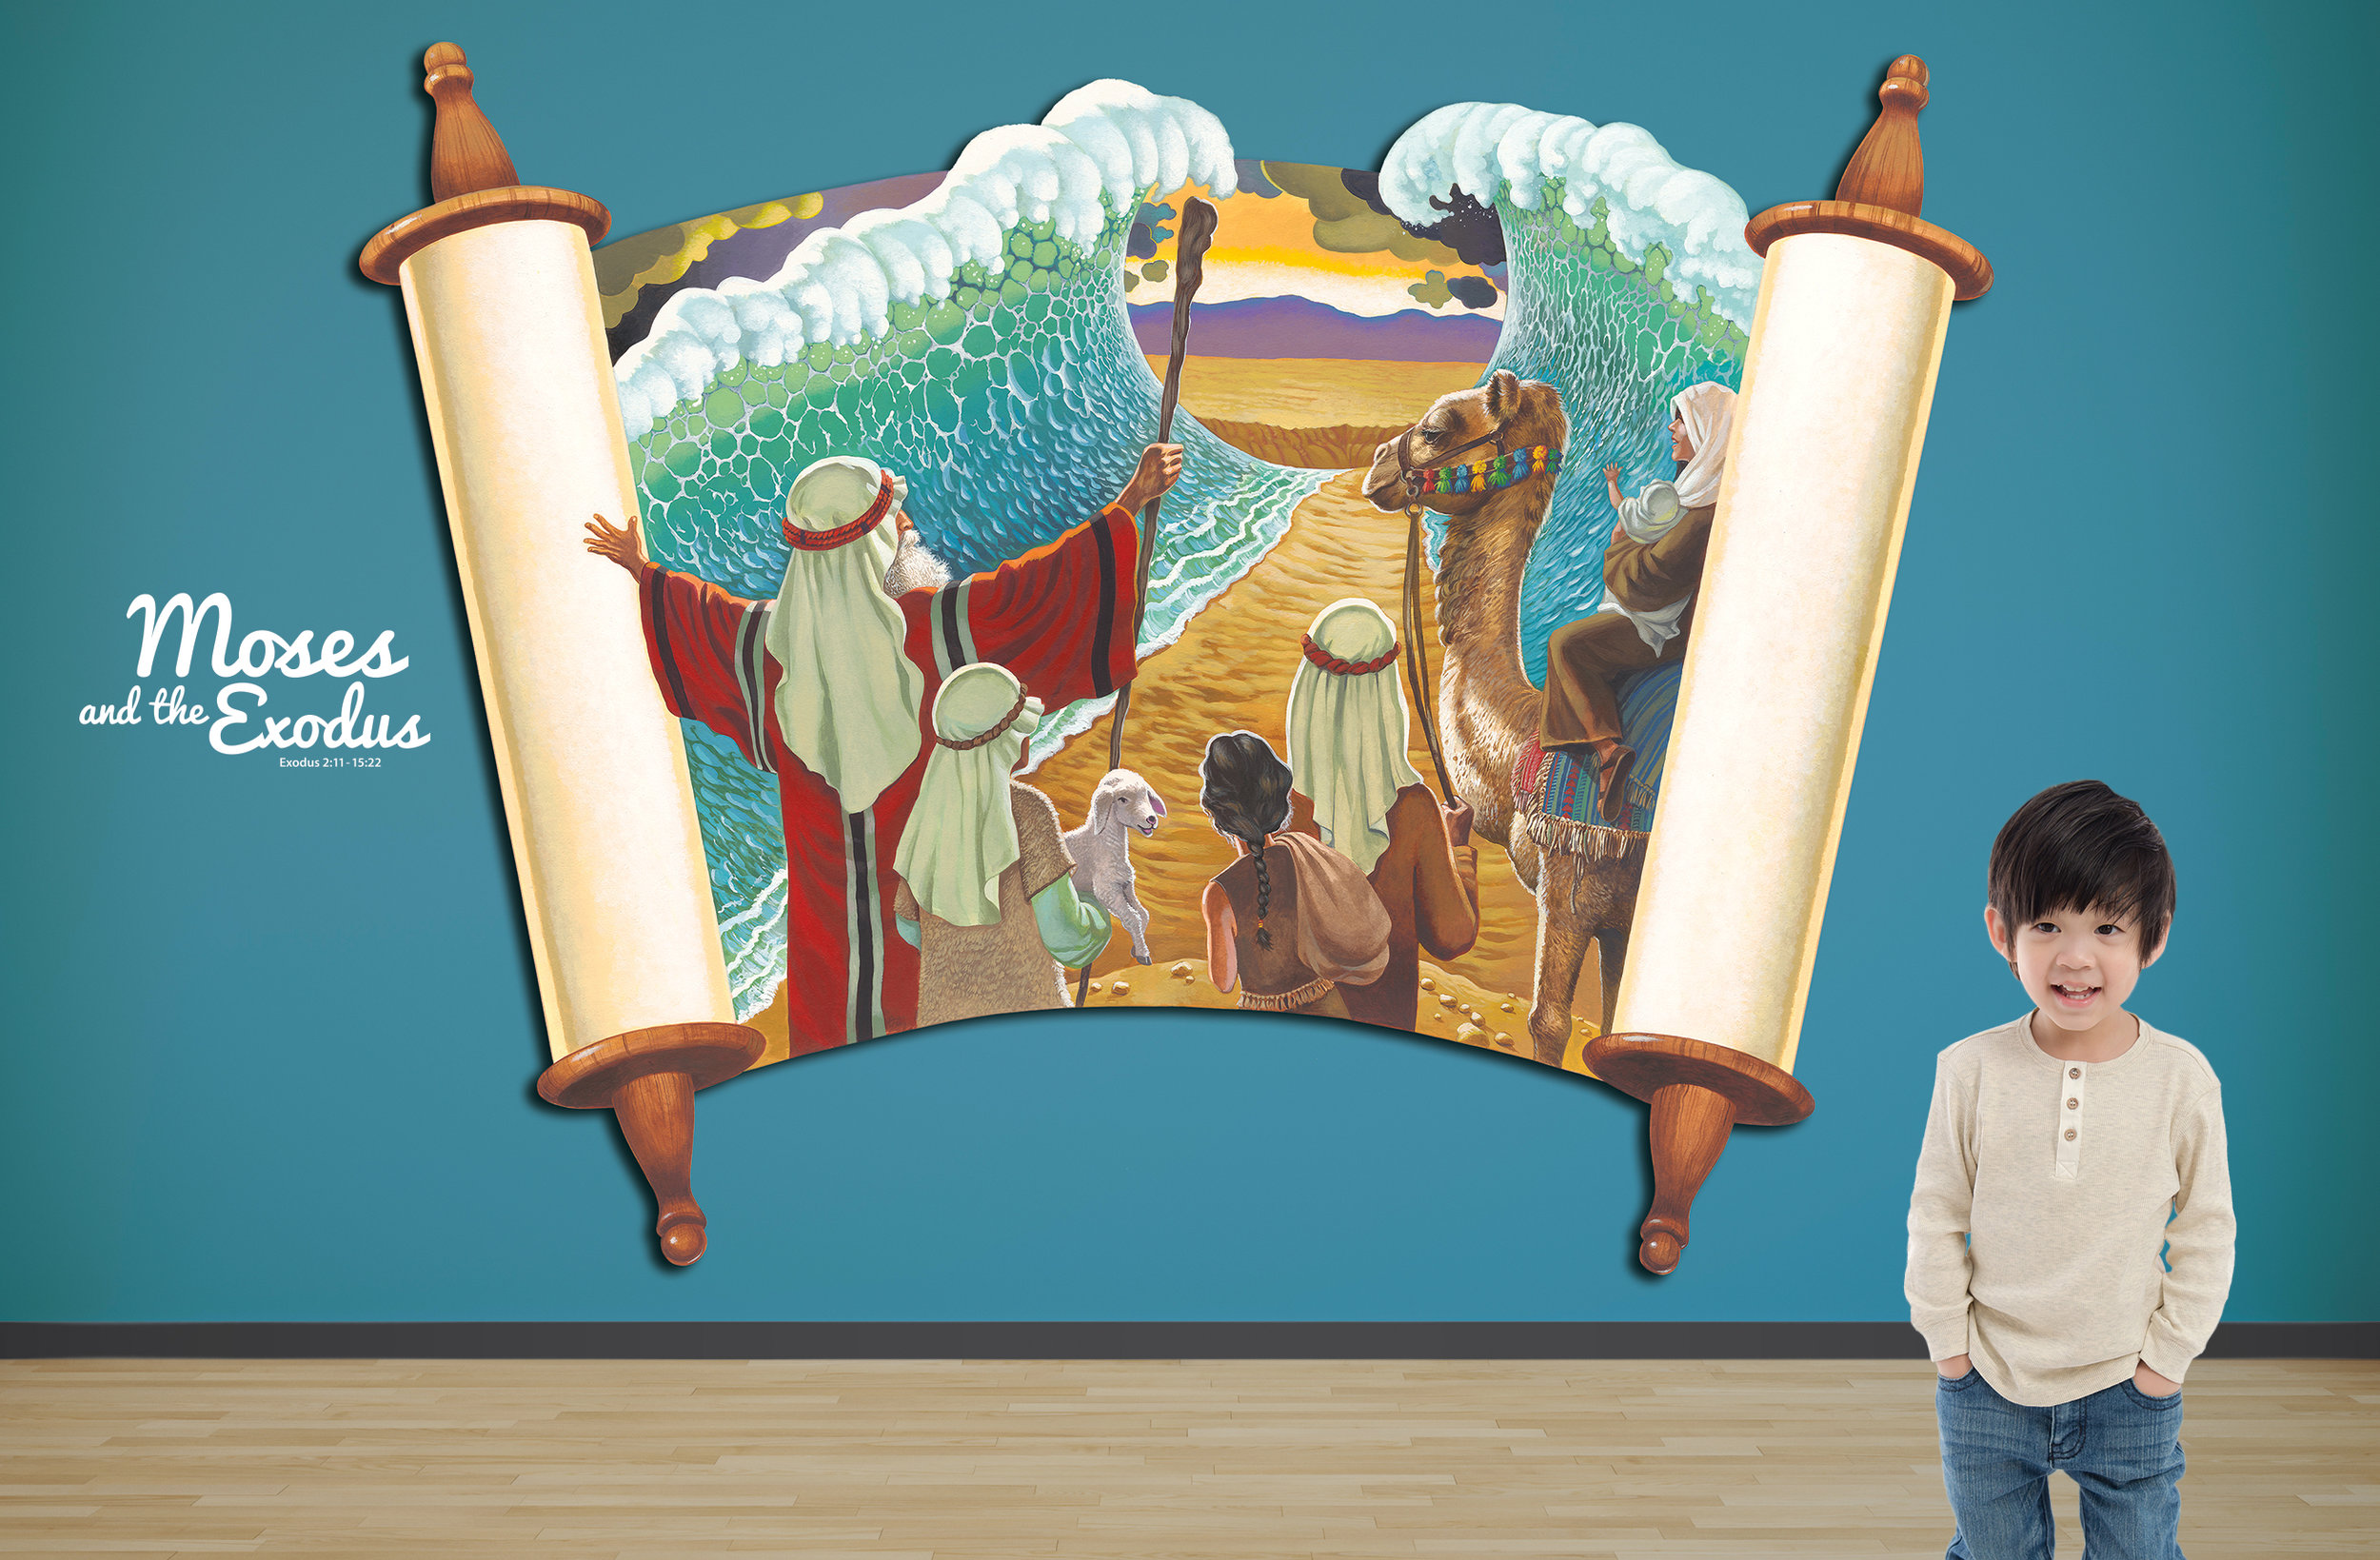 Children's Ministry Themed Biblical Theme Hallway Relief Illustrations